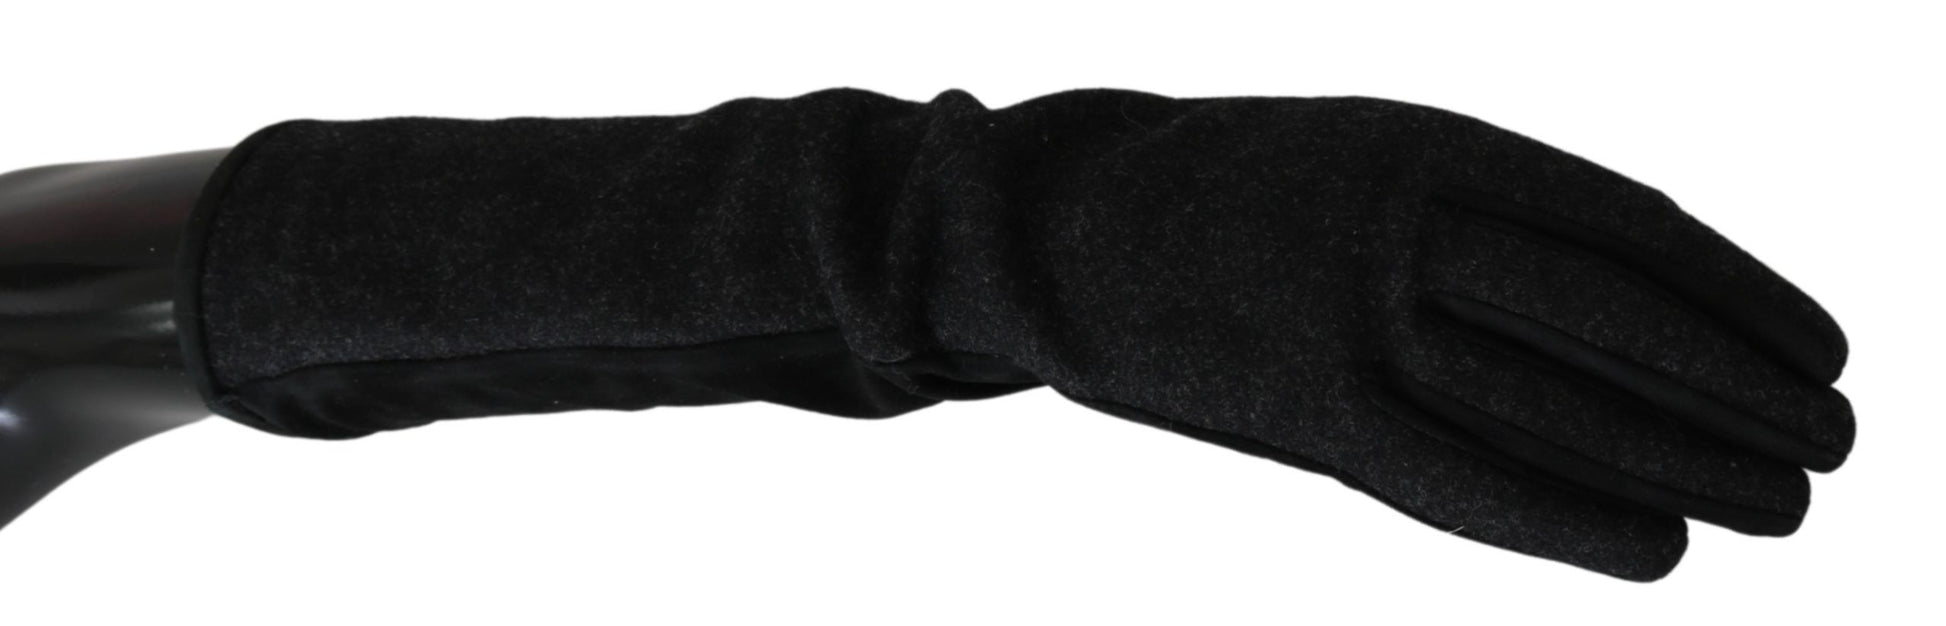 Black Grey Mid Arm Length Mittens Wool Gloves - Designed by Dolce & Gabbana Available to Buy at a Discounted Price on Moon Behind The Hill Online Designer Discount Store